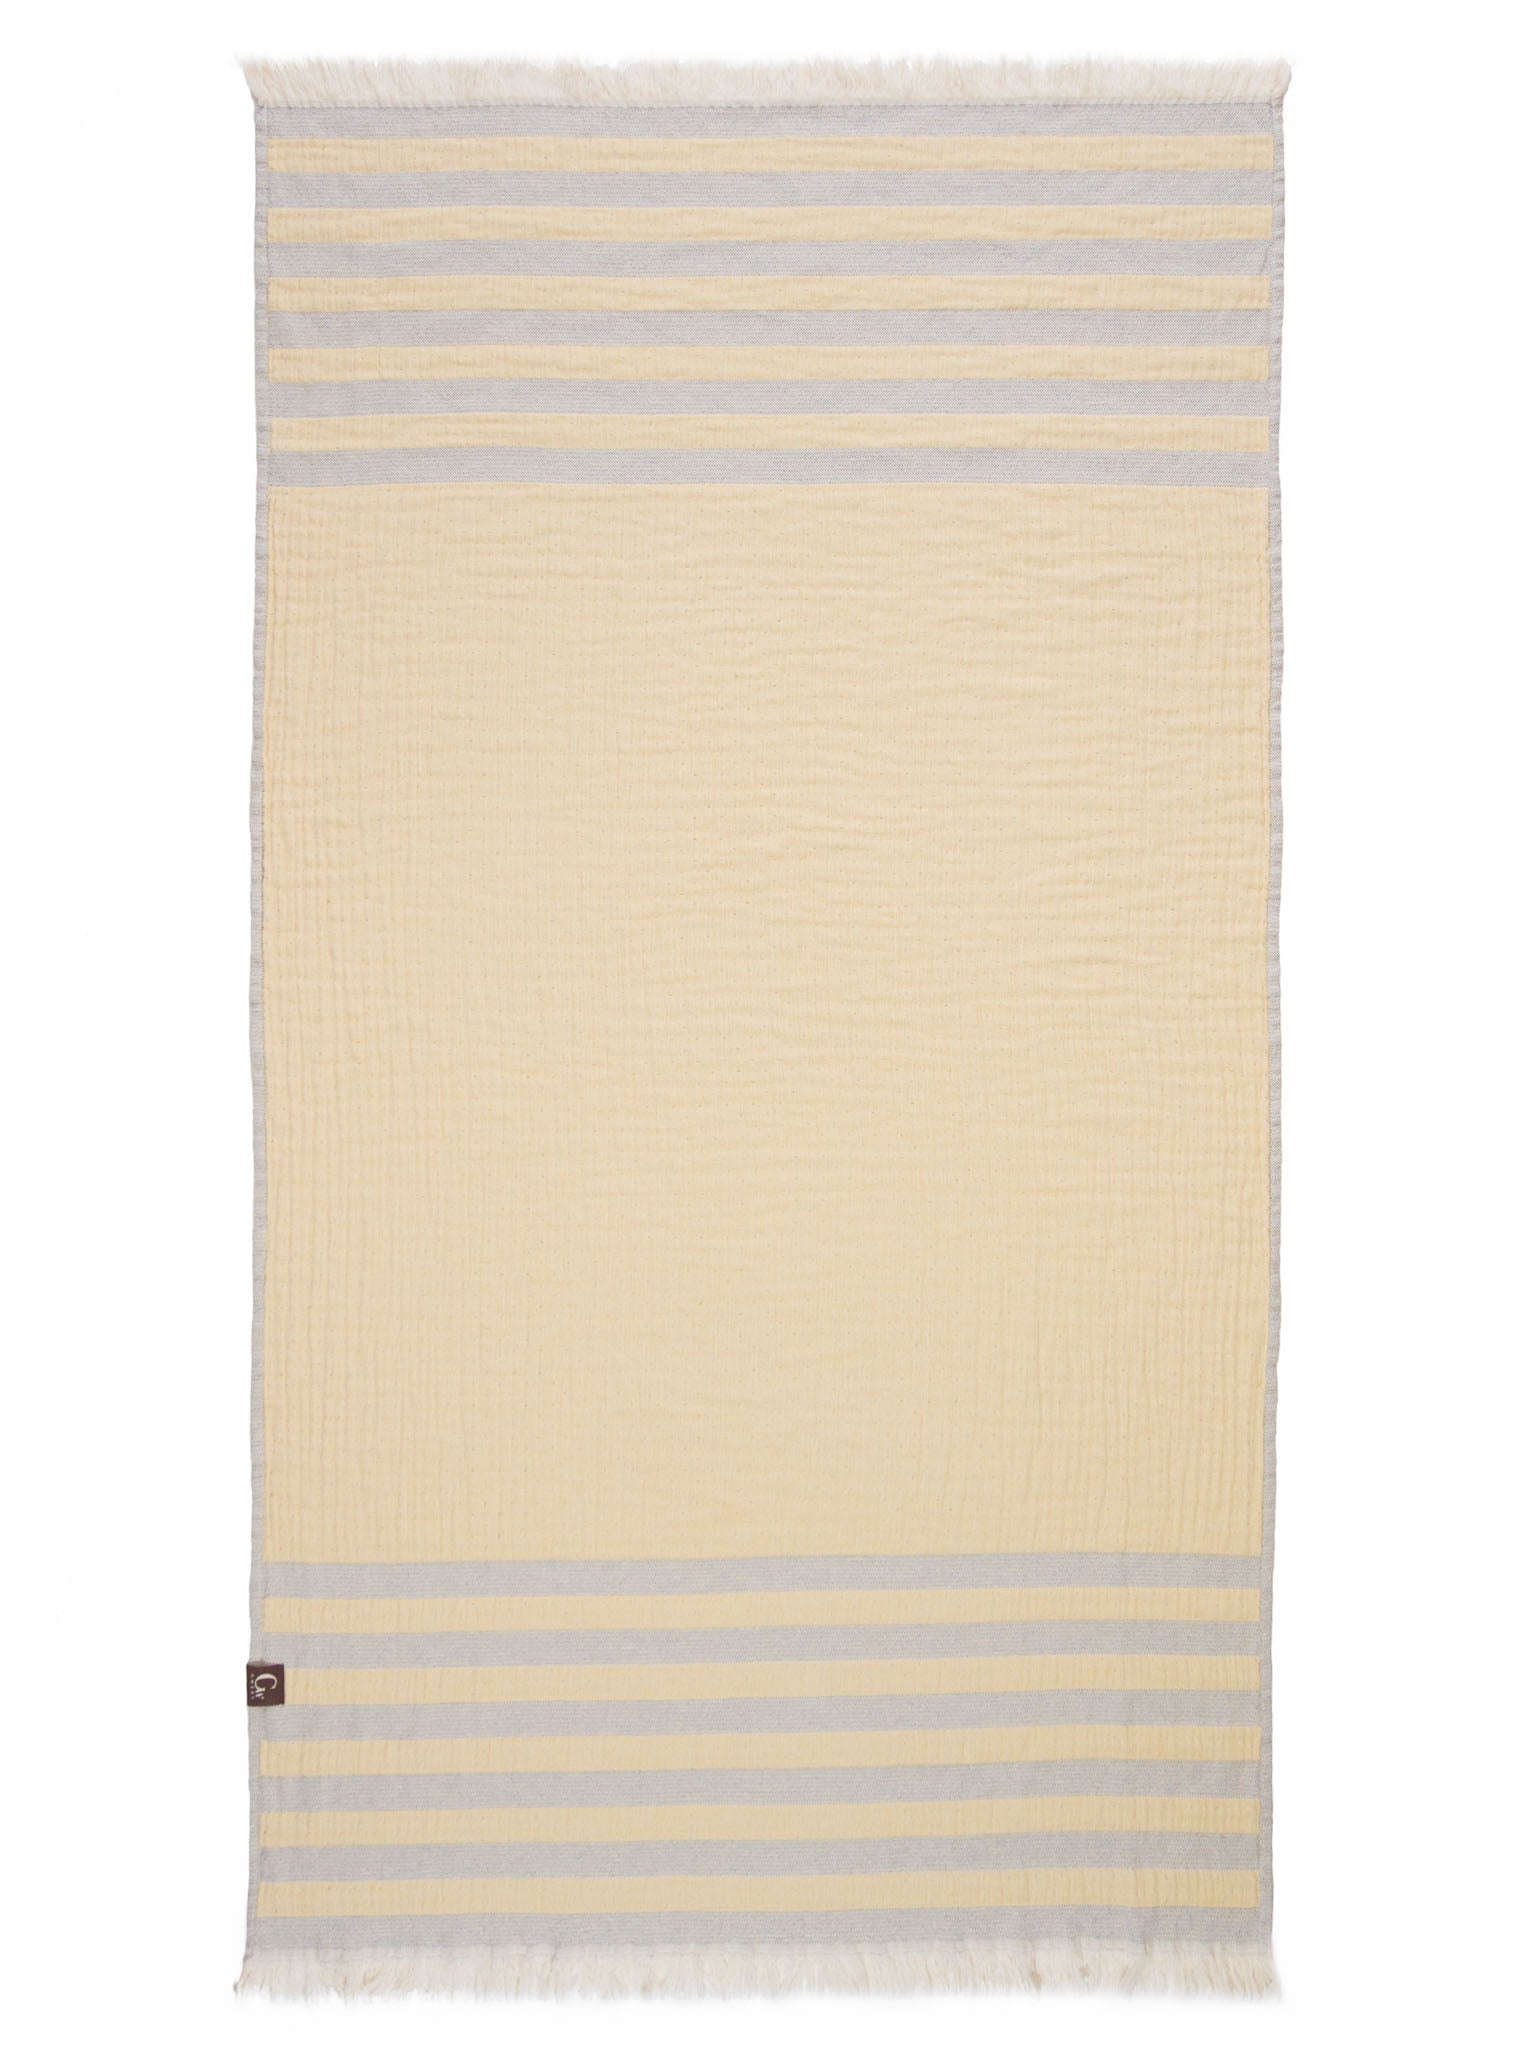 Blue and yellow striped beach towel open up showing yellow side